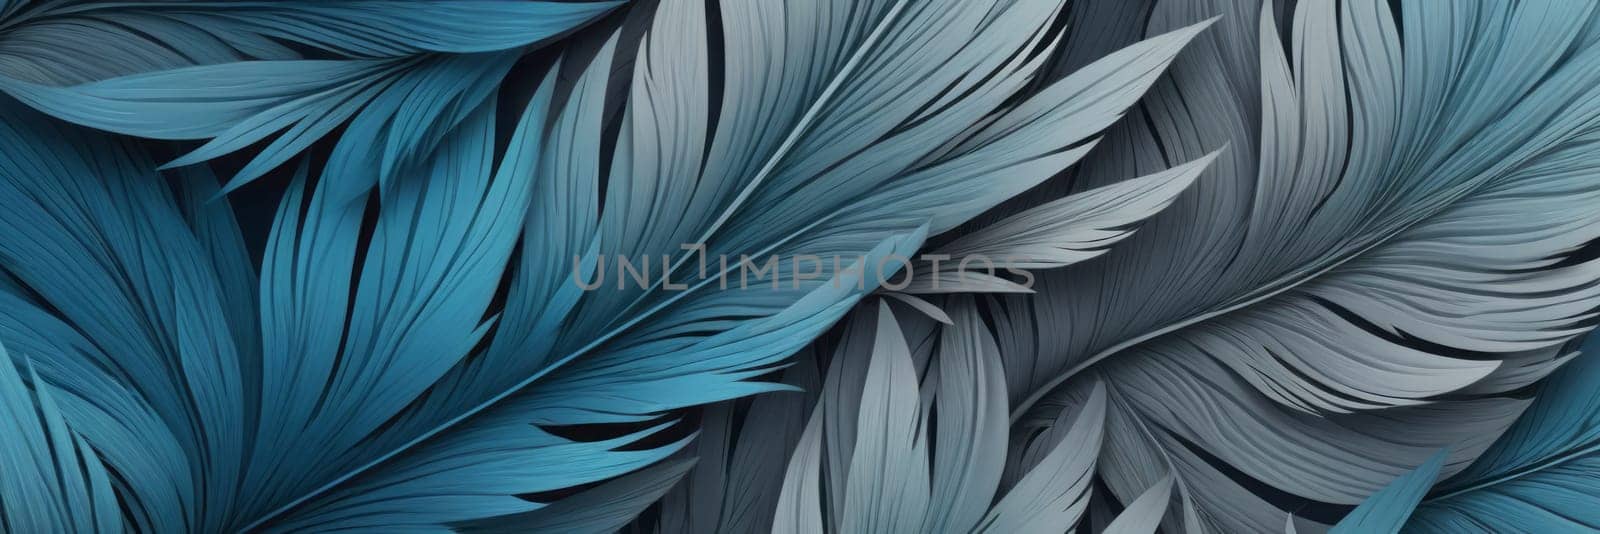 Feathered Shapes in Gray and Steel blue by nkotlyar